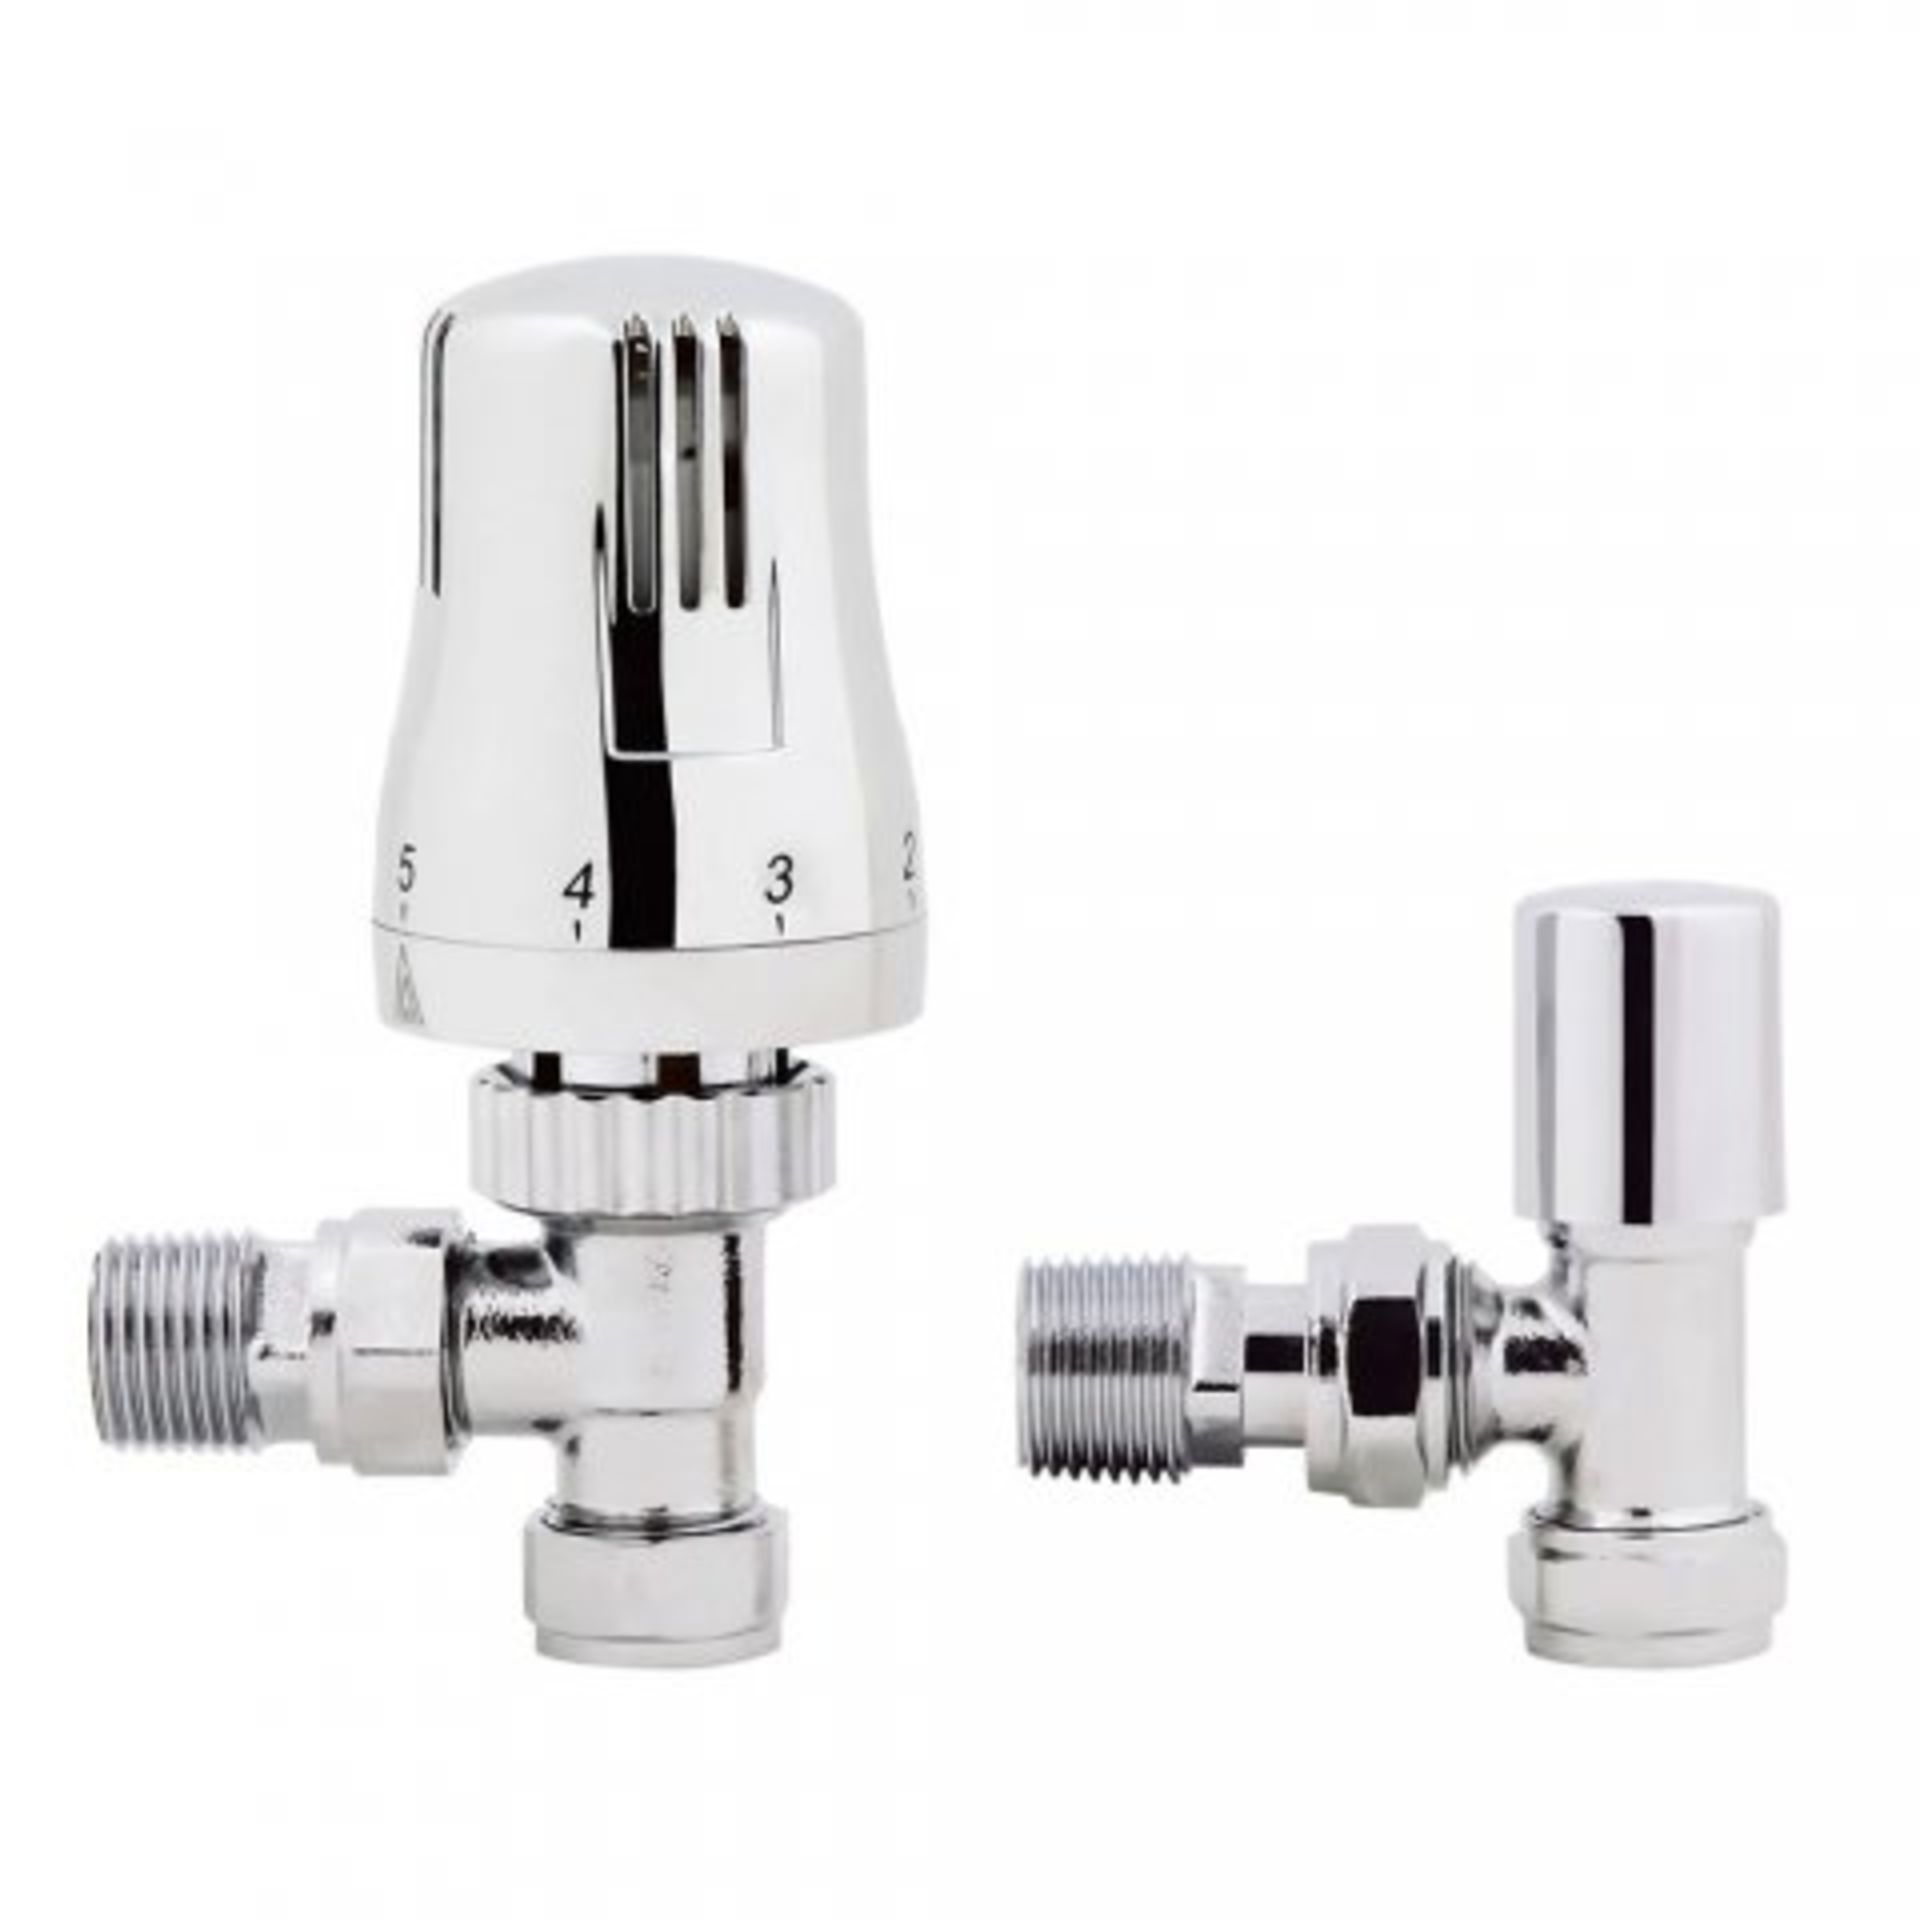 (I66) 15mm Standard Connection Thermostatic Angled Chrome Radiator Valves Made of solid brass, our